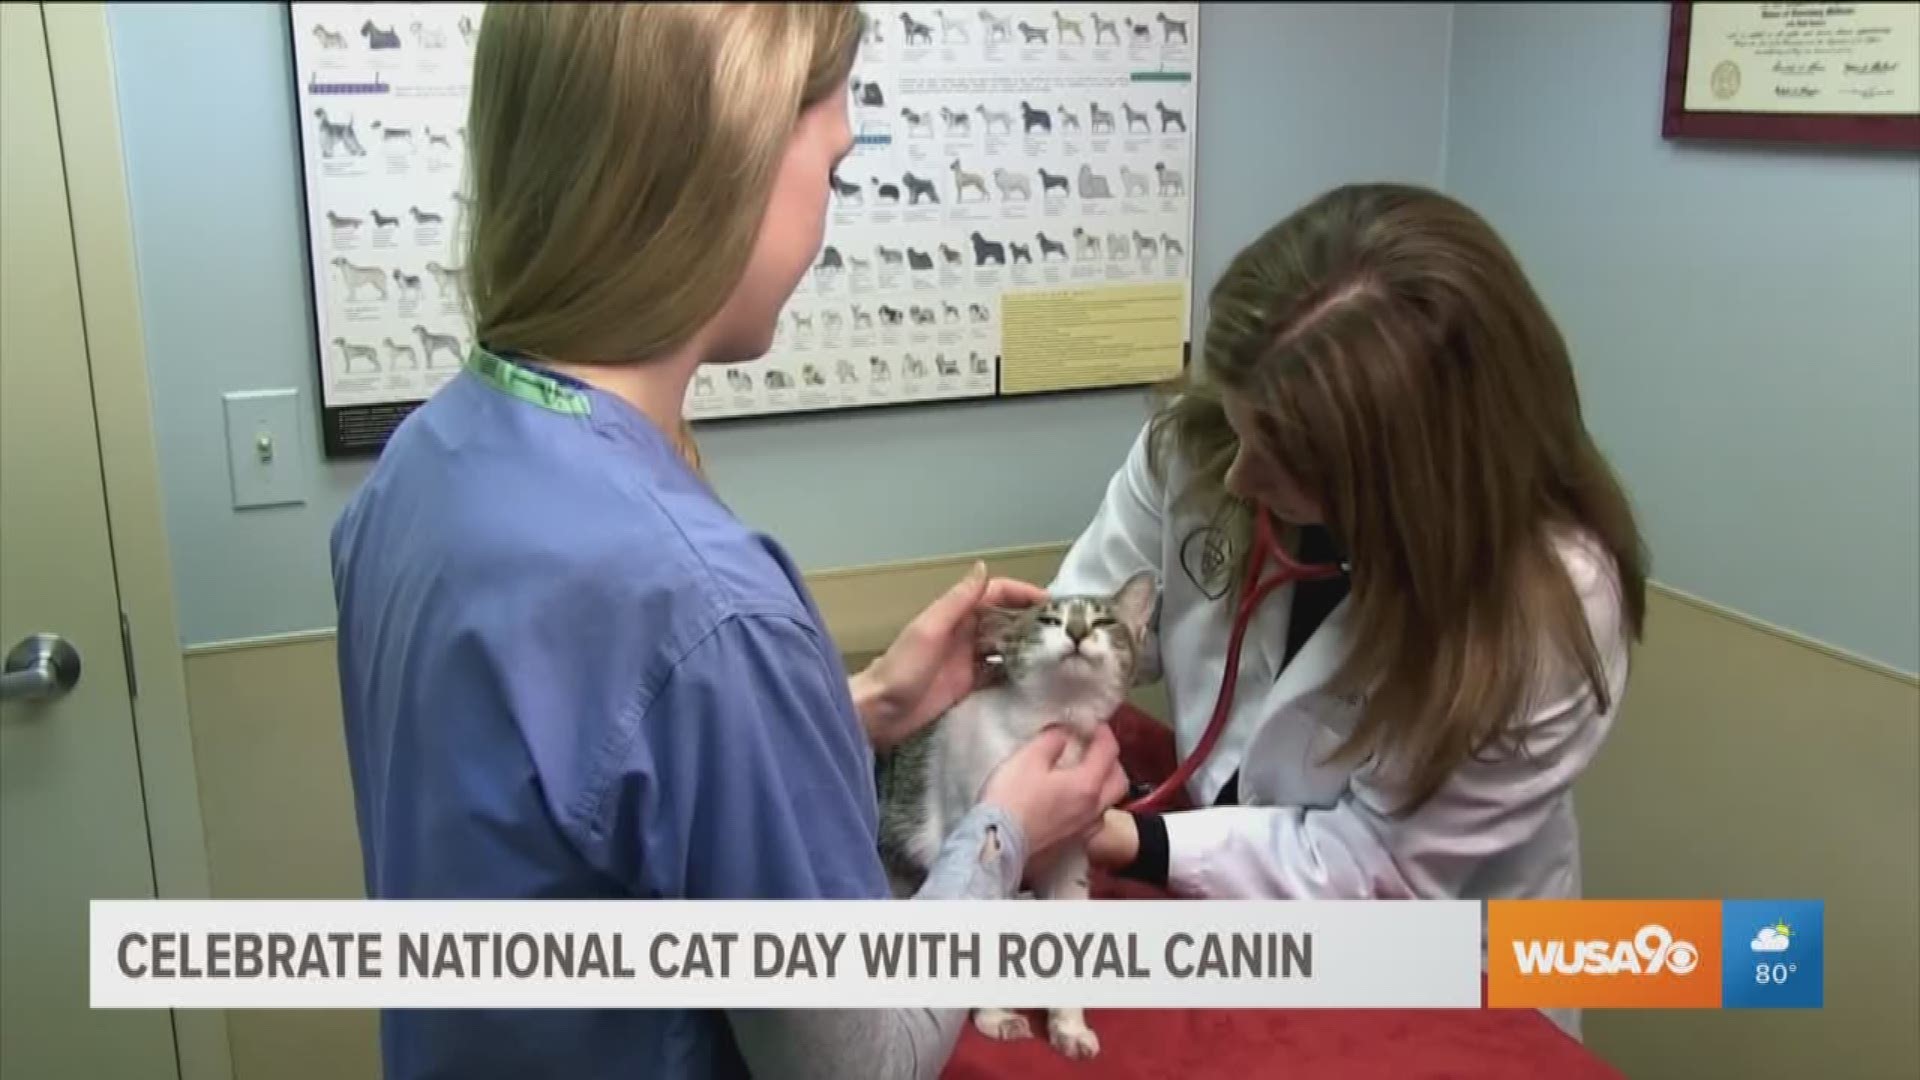 The following segment is sponsored by Royal Canin. August 22 is National Cat Day, so we have the top tips for you to take care of your furry friend from veterinarian, Dr. Natalie Marks.